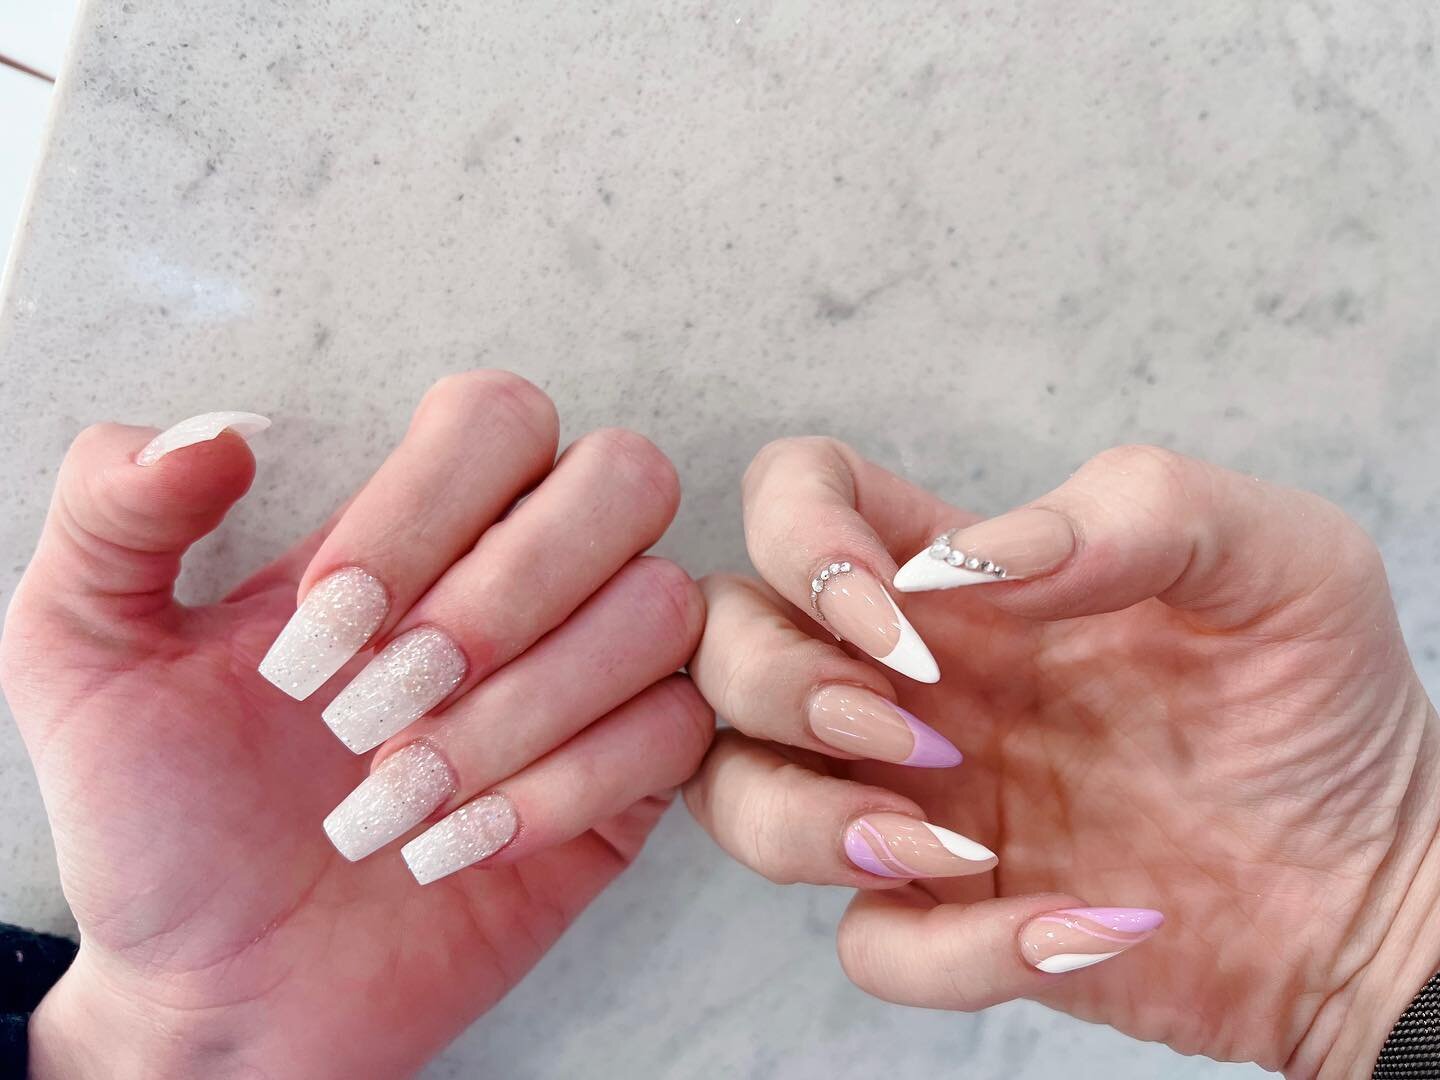 Saturday is for a trip to a nail salon. Grab your bestie and let&rsquo;s have a fresh manicure togther 👭💅🏻

#blumnailbar #nails #nailart #trendynailsalon #nailsofinstagram #manicure #naildesigns #nailstyles #athensga #trendynails #opi #chisel #dnd